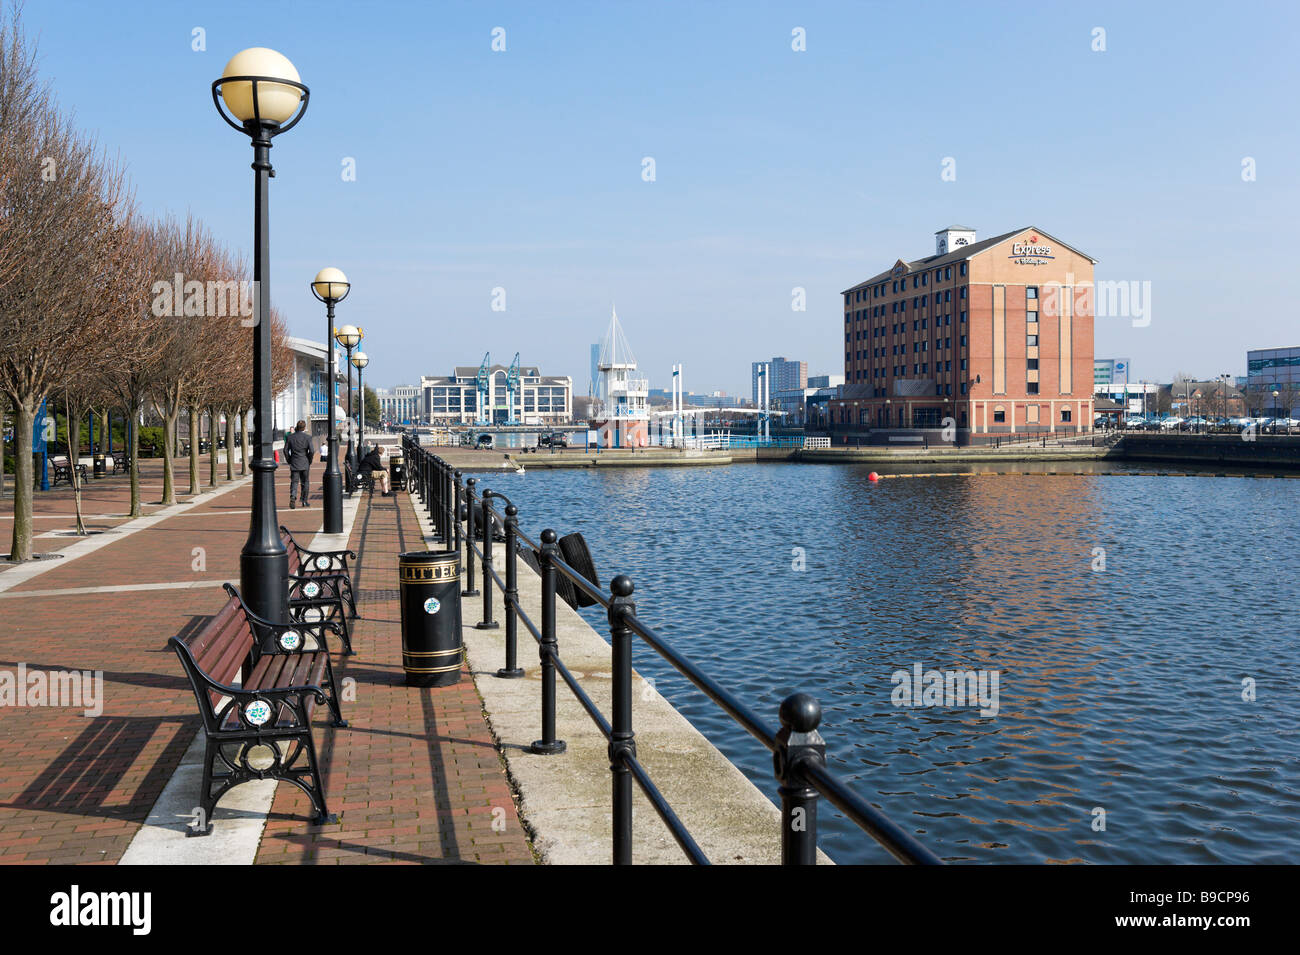 Die Promenade entlang den Manchester Ship Canal und das Express by Holiday Inn Hotel, Engla, Greater Manchester, Salford Quays Stockfoto